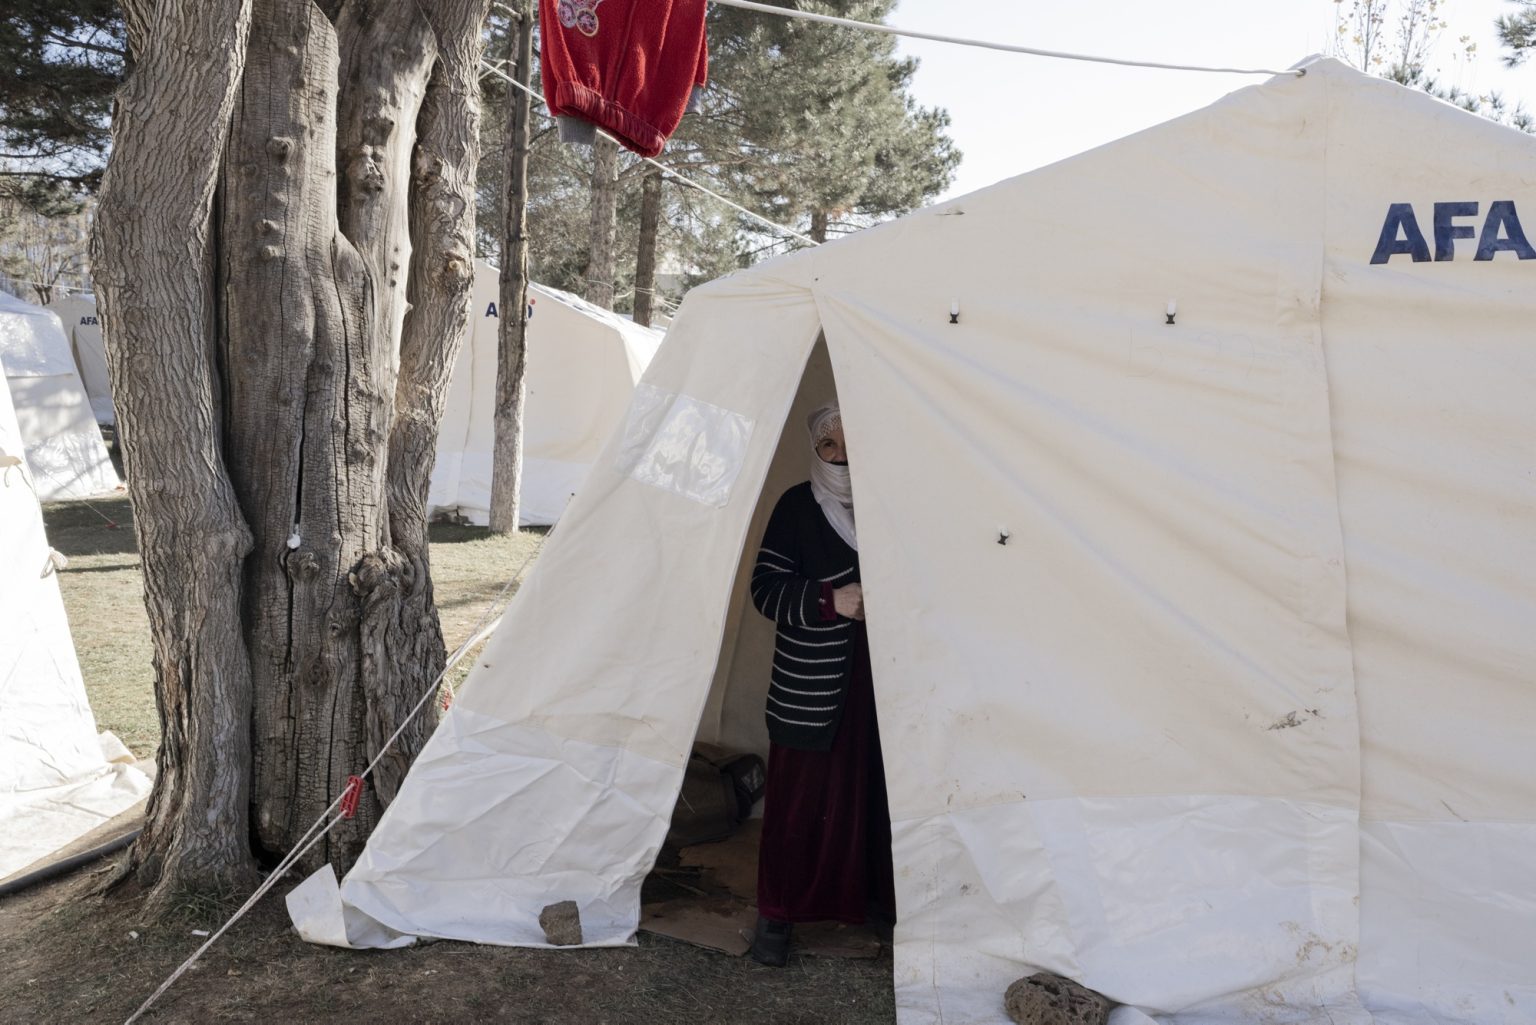 Diyarbakir, Turkey, February 2023 - The aftermath of the earthquake that hit southern Turkey and northern Syria. A woman stand inside her tent in a tent camp in the city of Diyarbakir.><
Diyarbakir, Turchia, febbraio 2023  Le conseguenze del terremoto che ha colpito la Turchia del Sud e la Siria del nord.